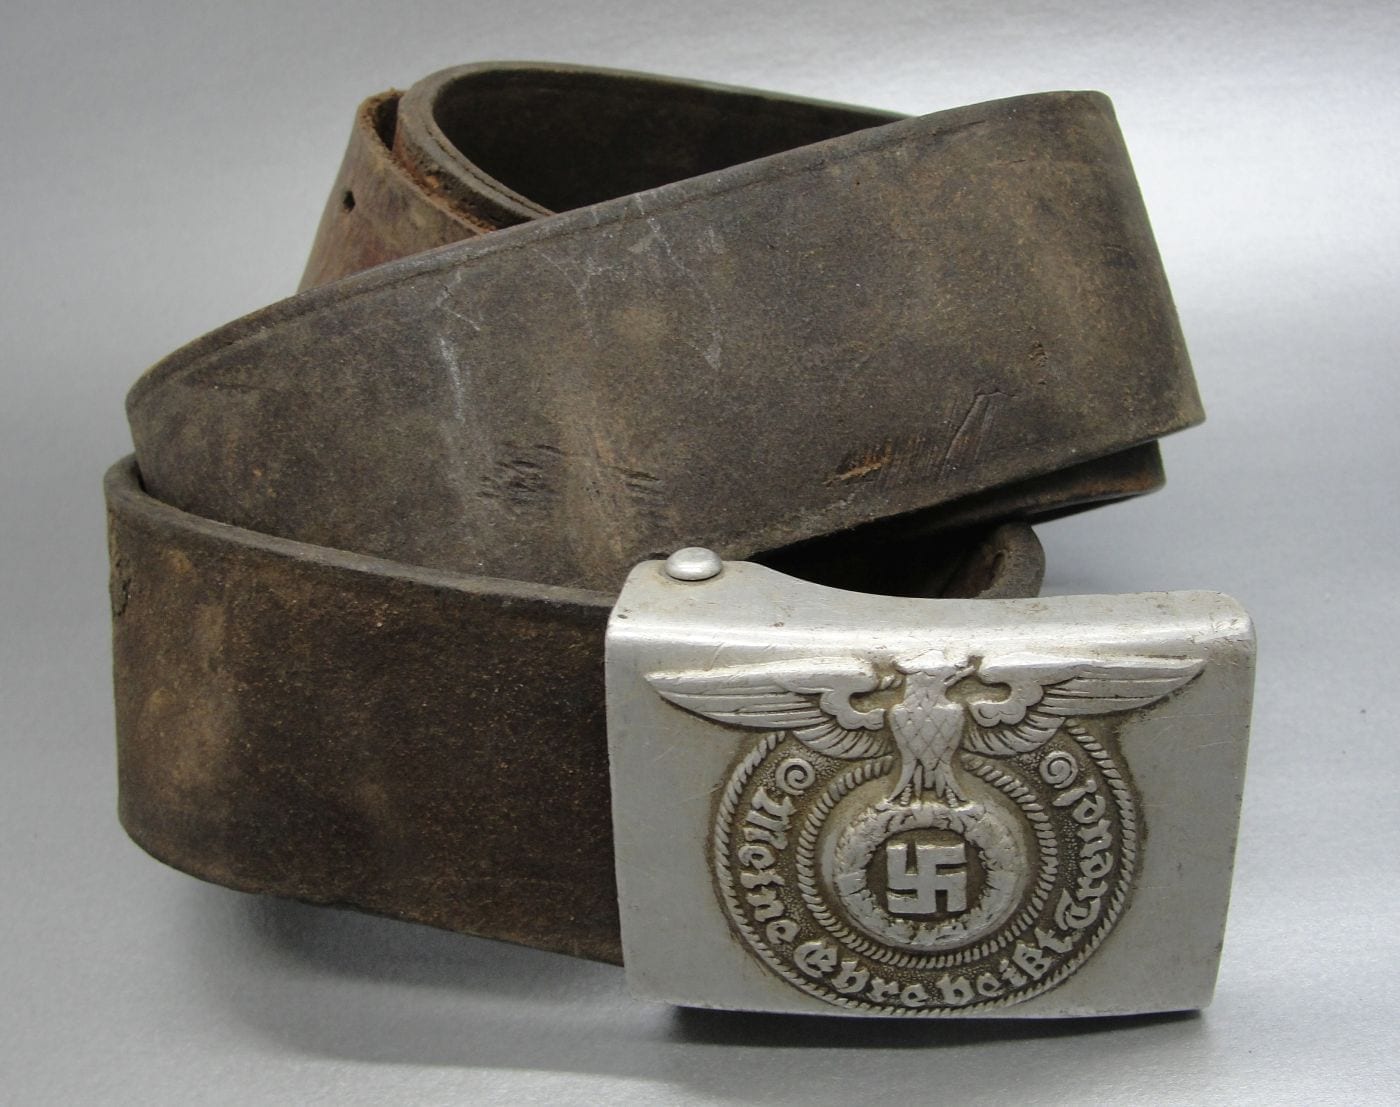 SS EM/NCOs Belt Buckle by "RZM 822/38 SS" with 1938 Dated Belt